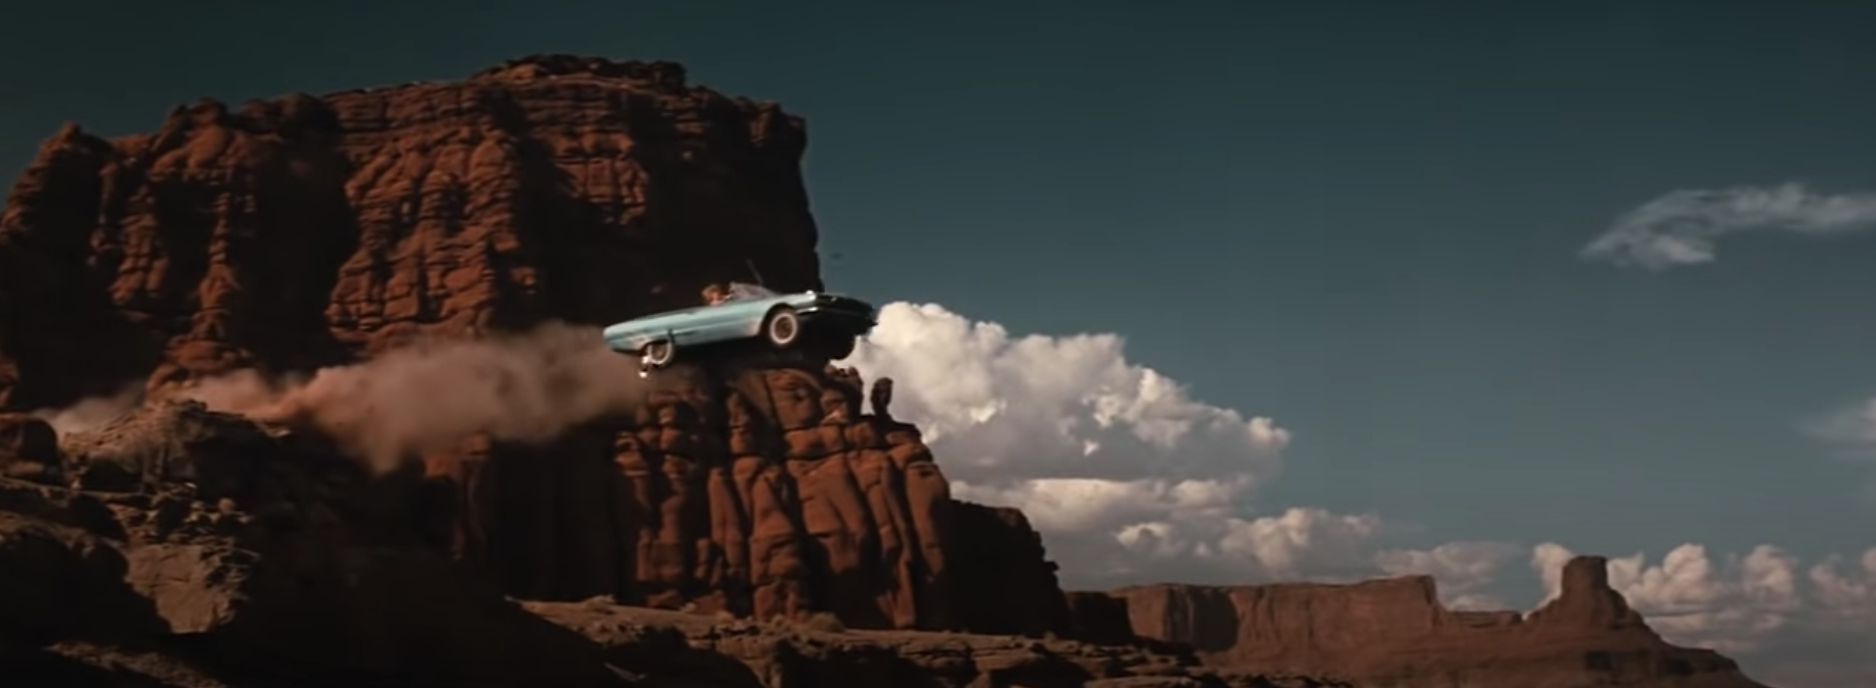 A car flies off the side of a cliff